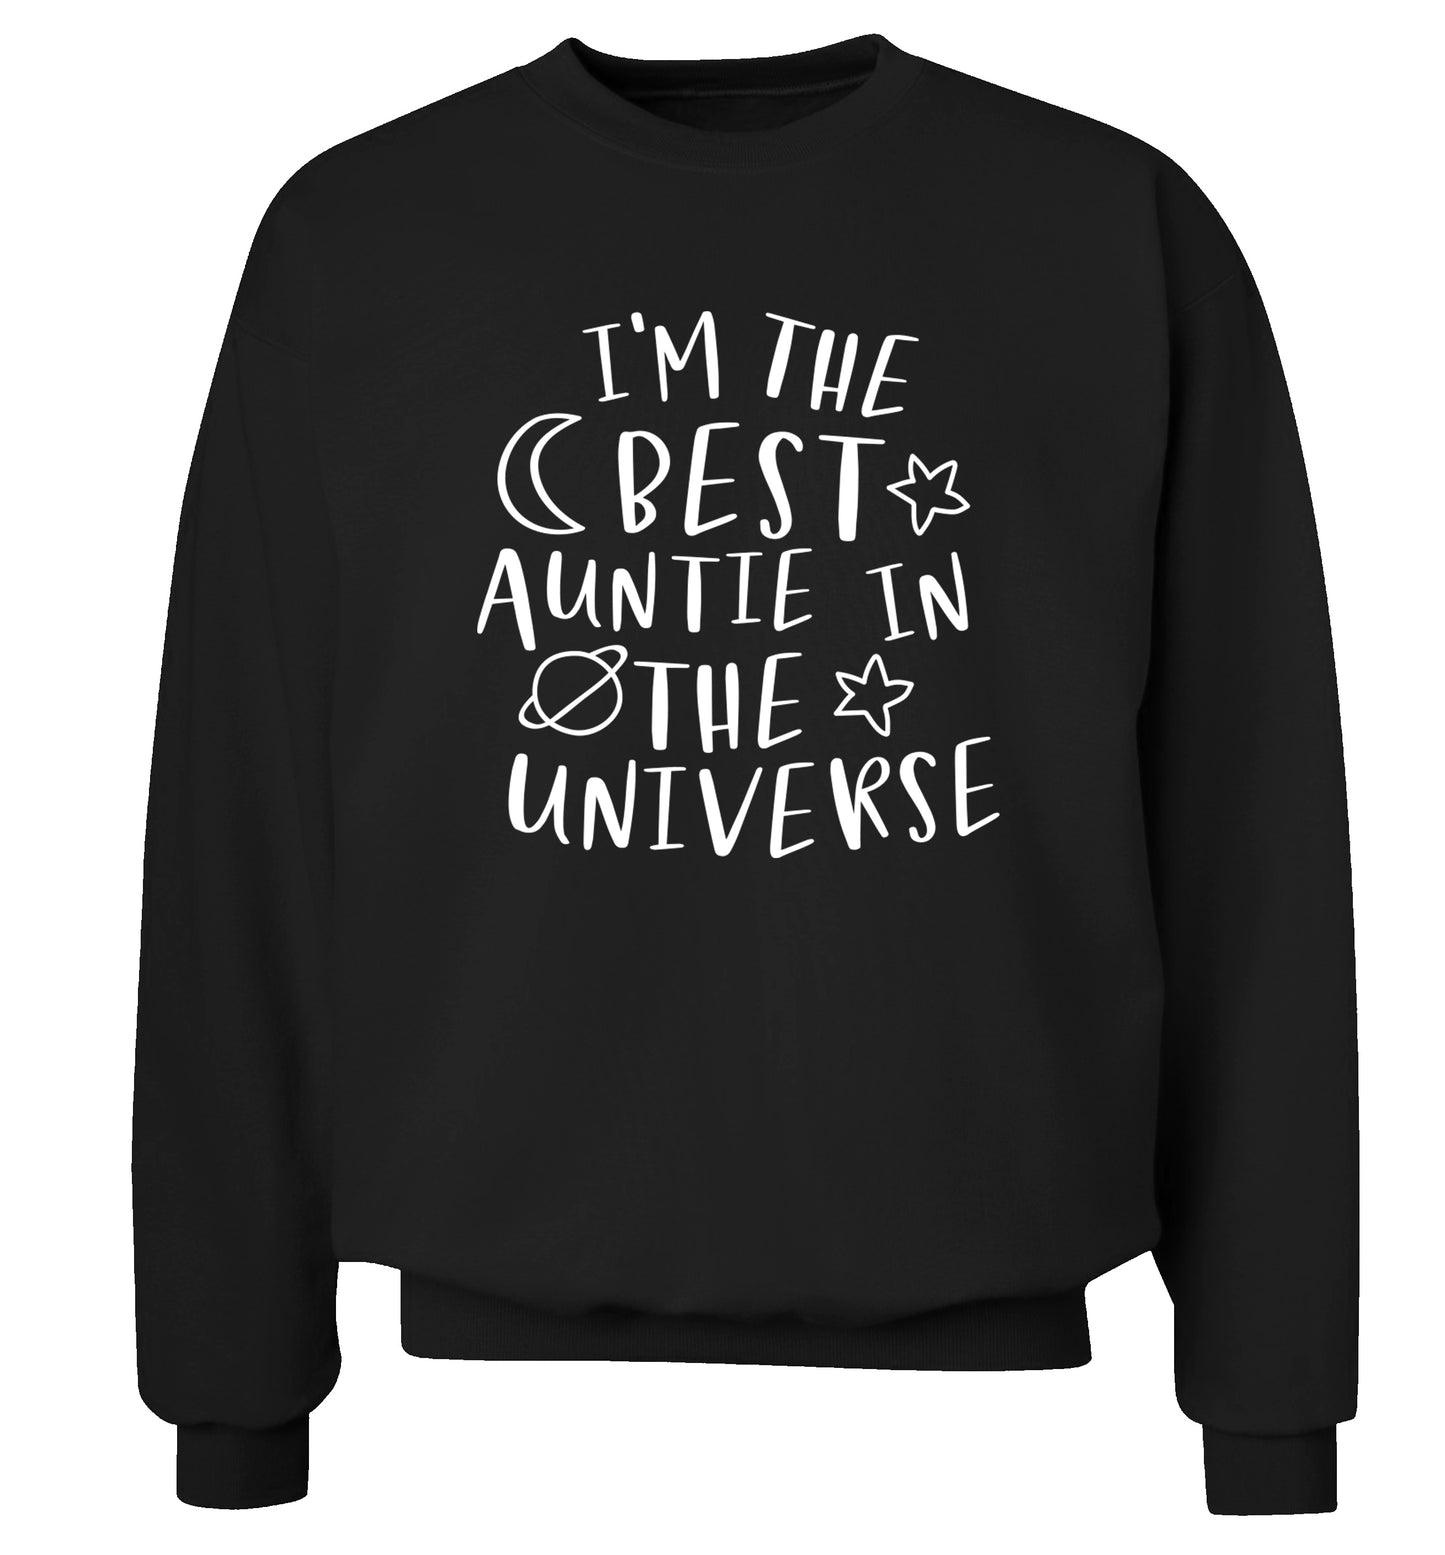 I'm the best auntie in the universe Adult's unisex black Sweater 2XL